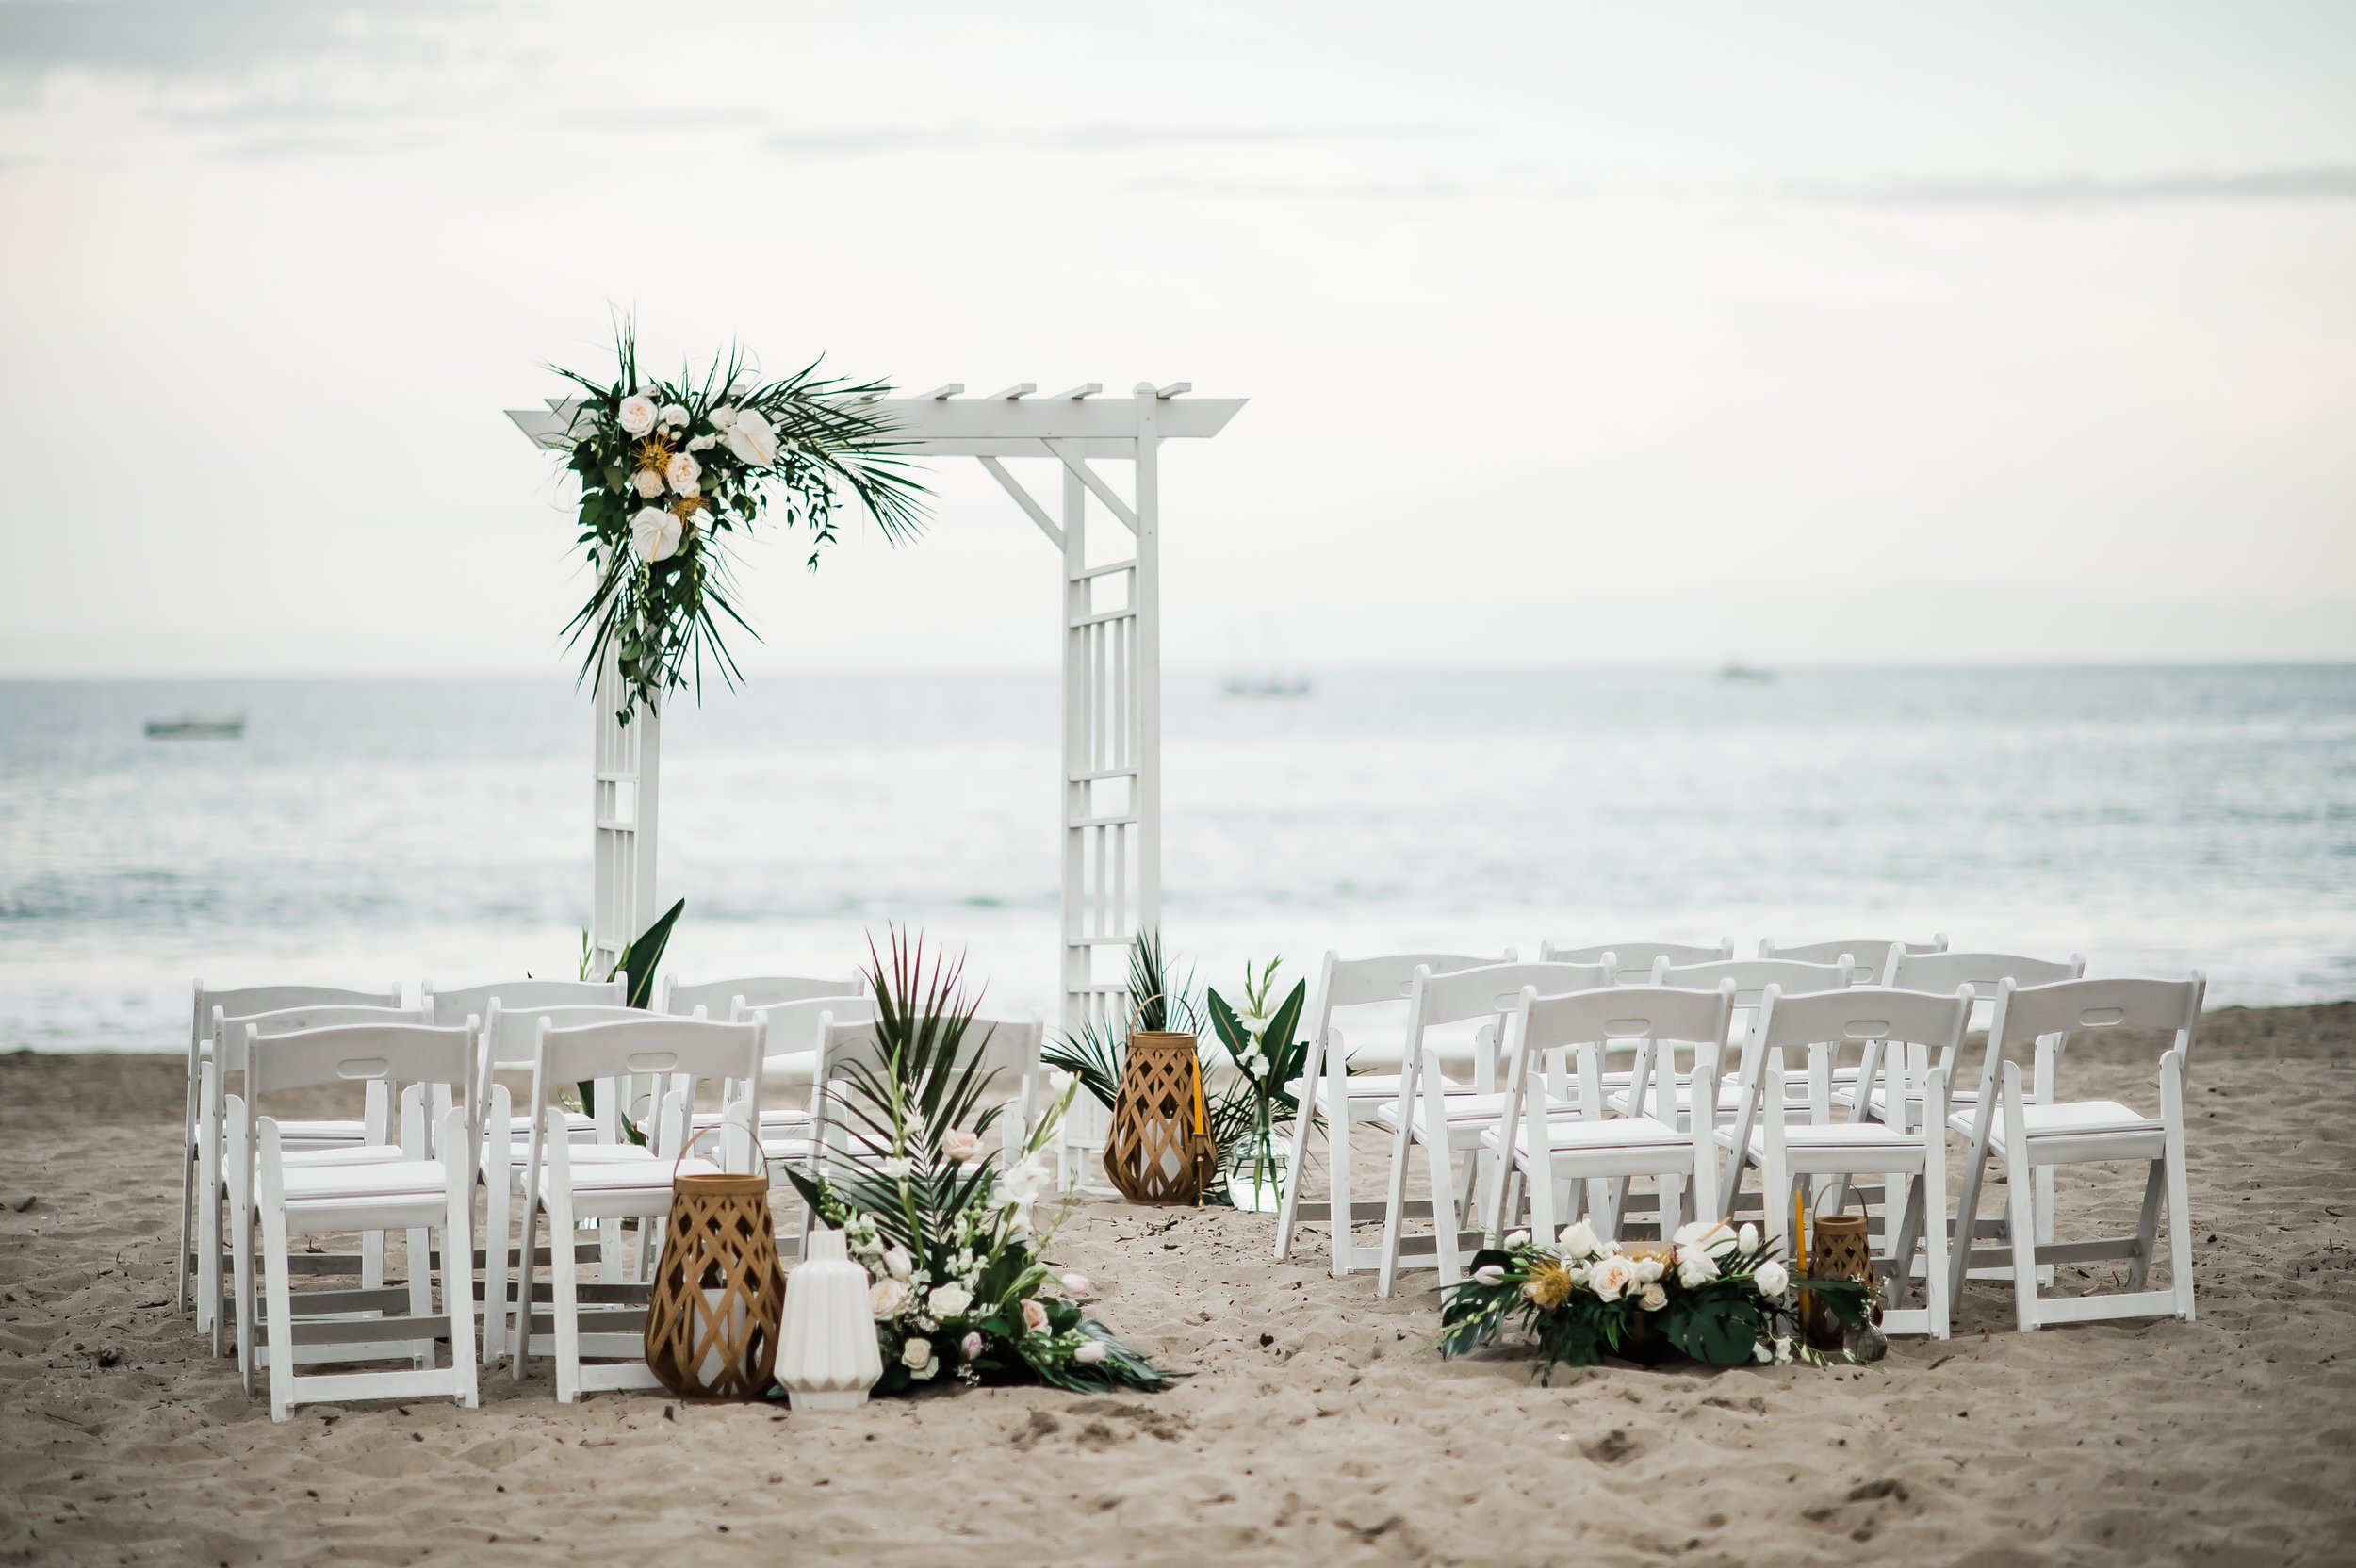 www.santabarbarawedding.com | Michelle Ramirez Photography | Tangled Lotus | Flowers and Lanterns at the Ceremony on the Beach